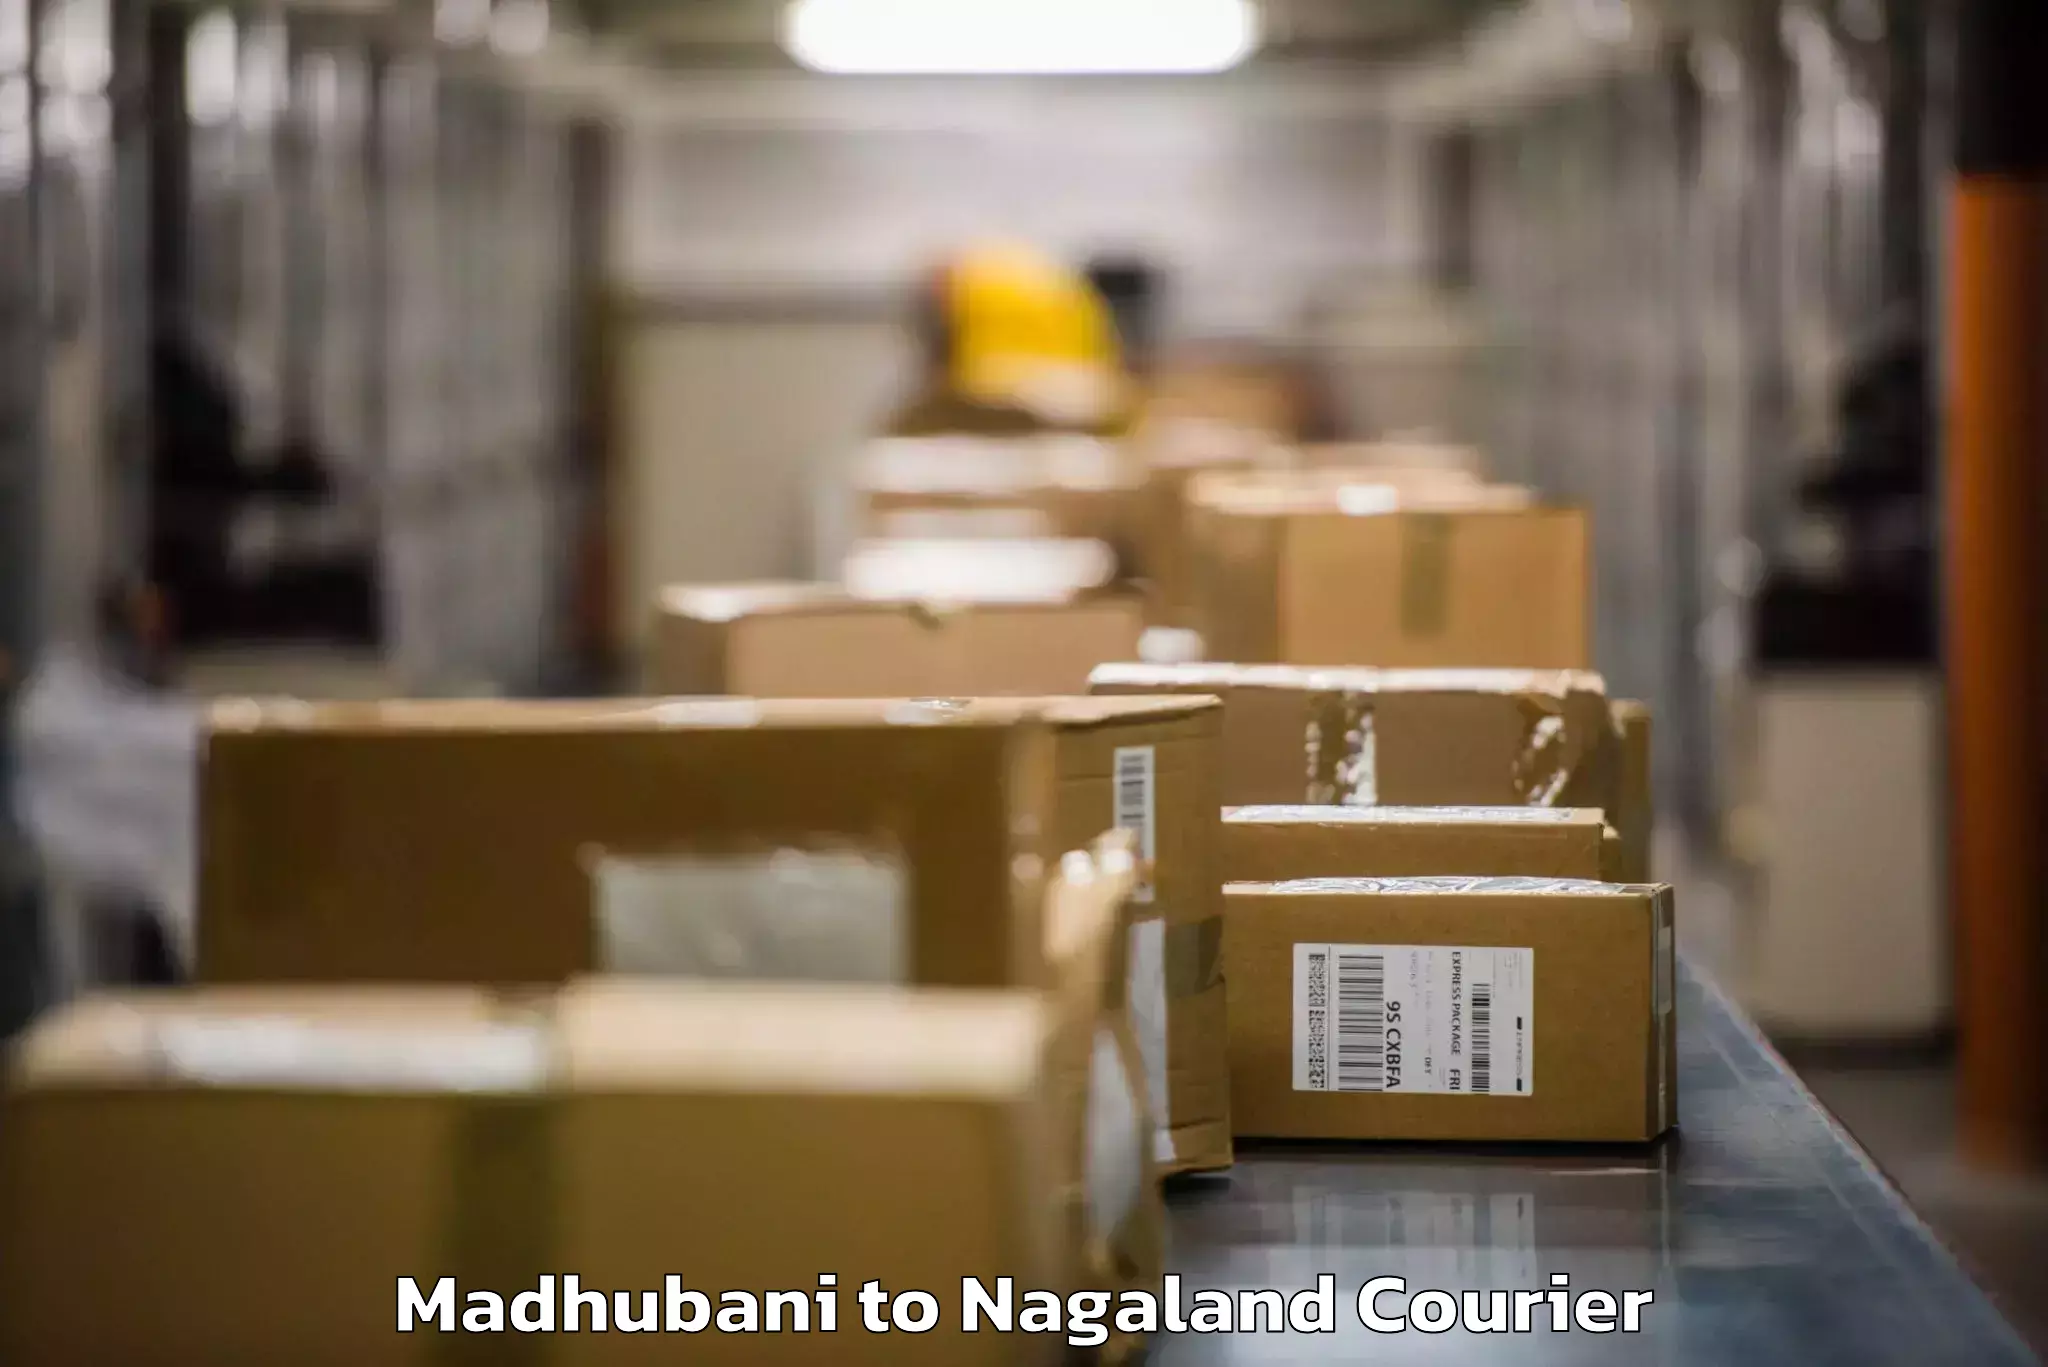 Personal effects shipping in Madhubani to Nagaland